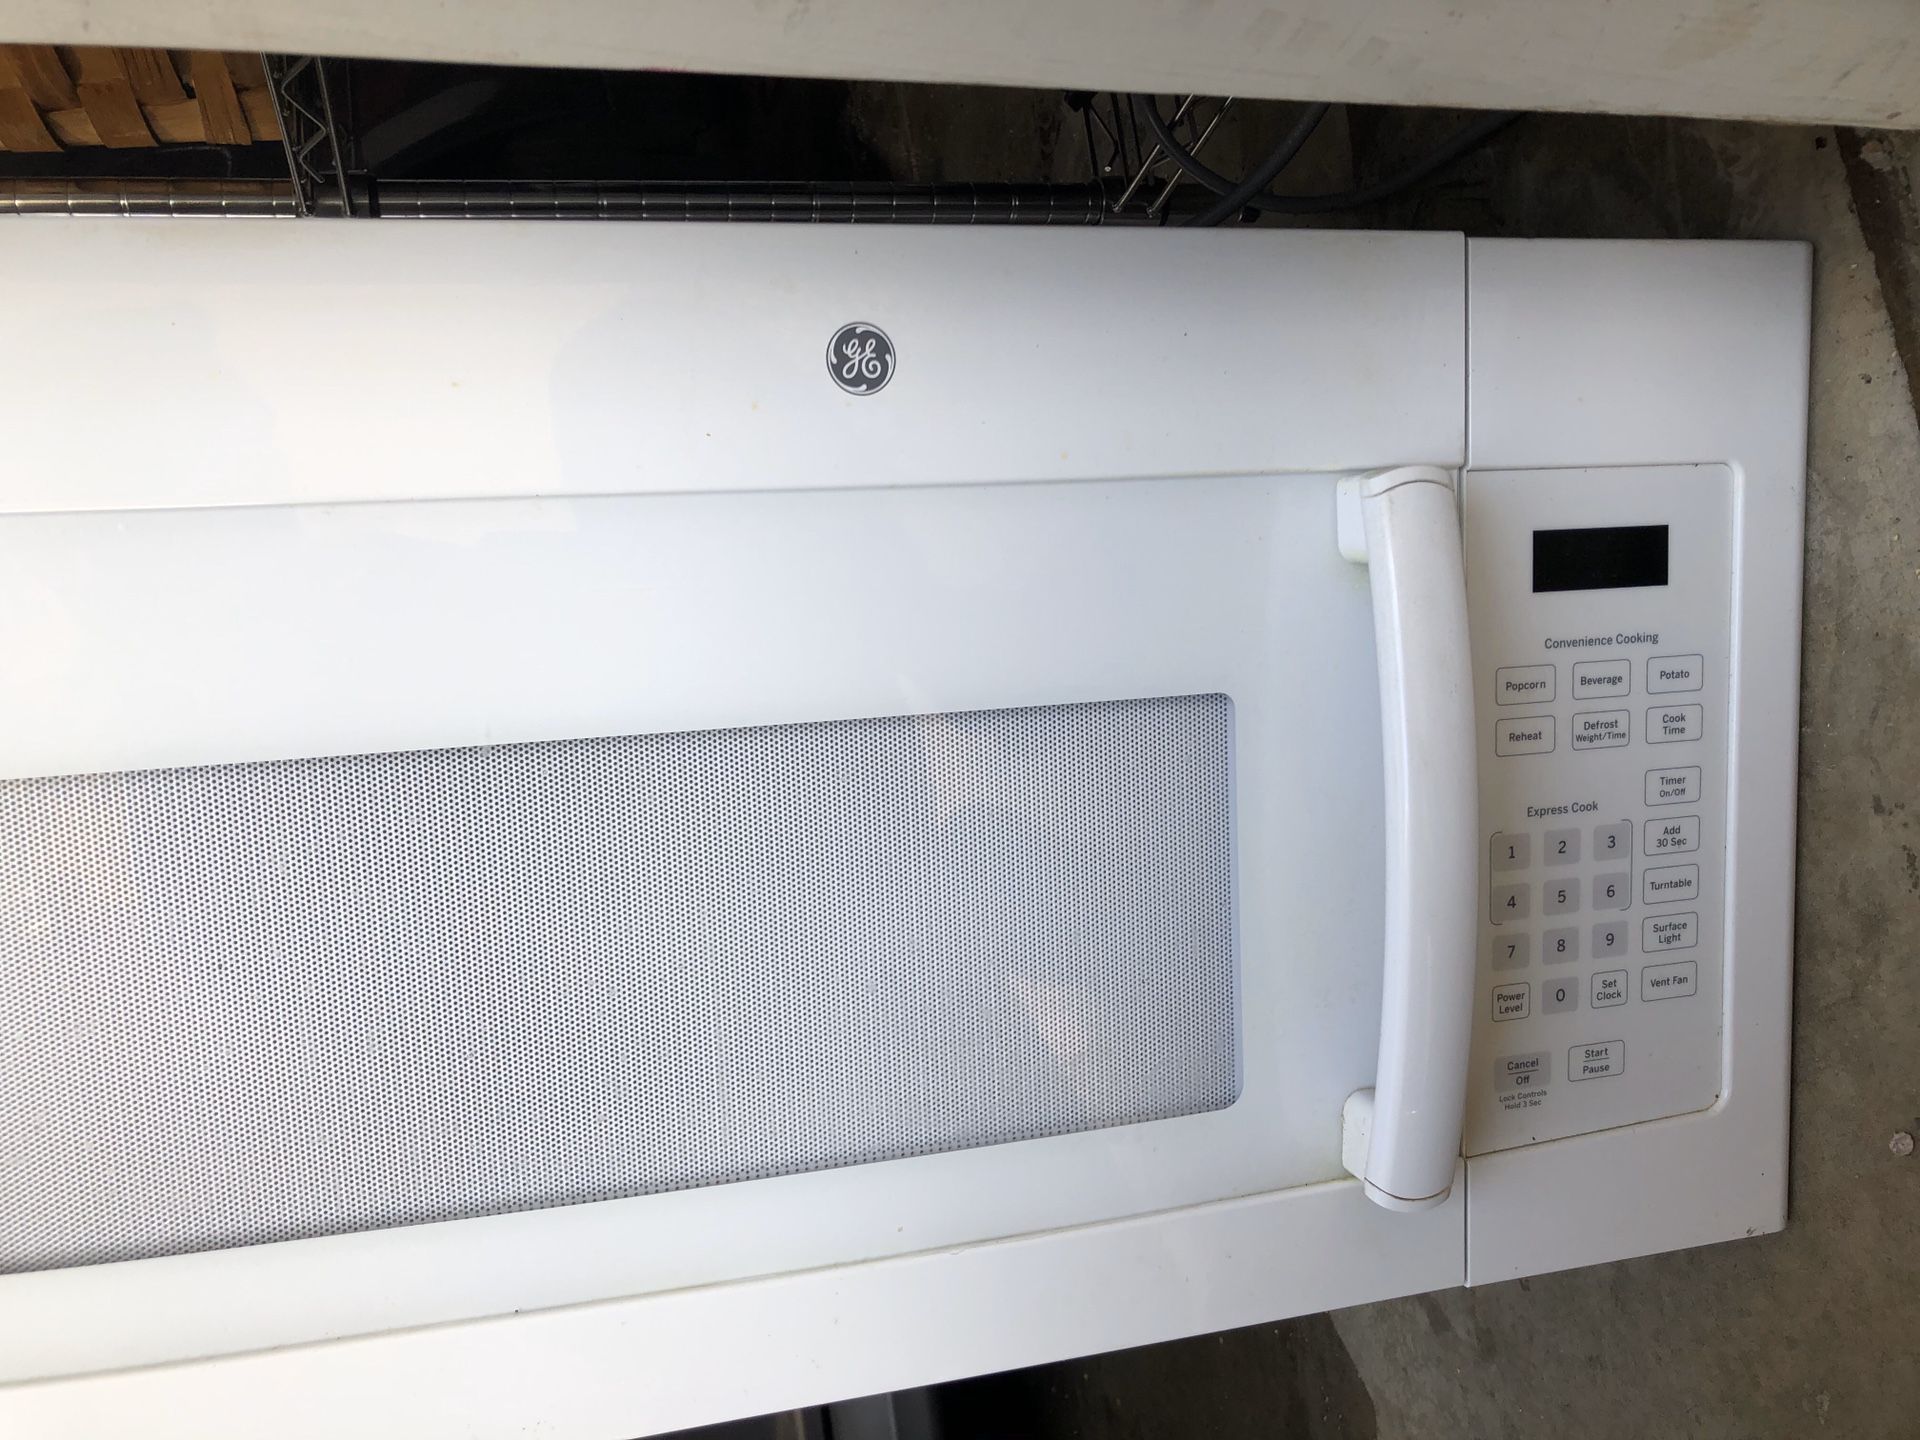 GE white over the top microwave & comes with wall mount.